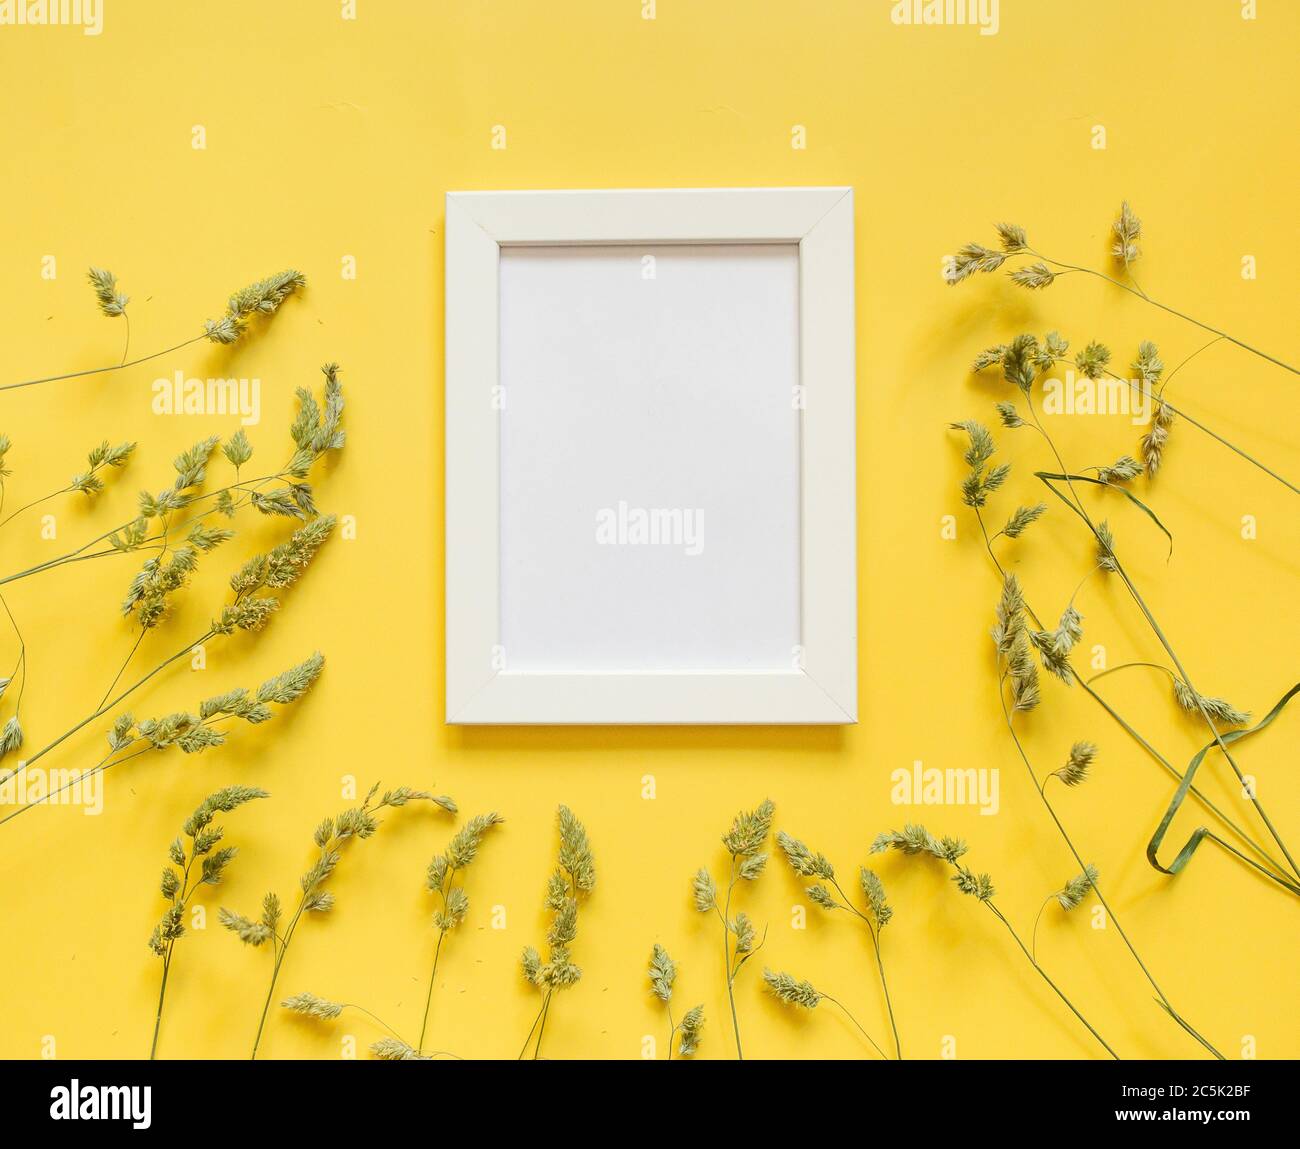 summer-autumn concept. spikelets of grass and frame on a yellow background. background for text Stock Photo